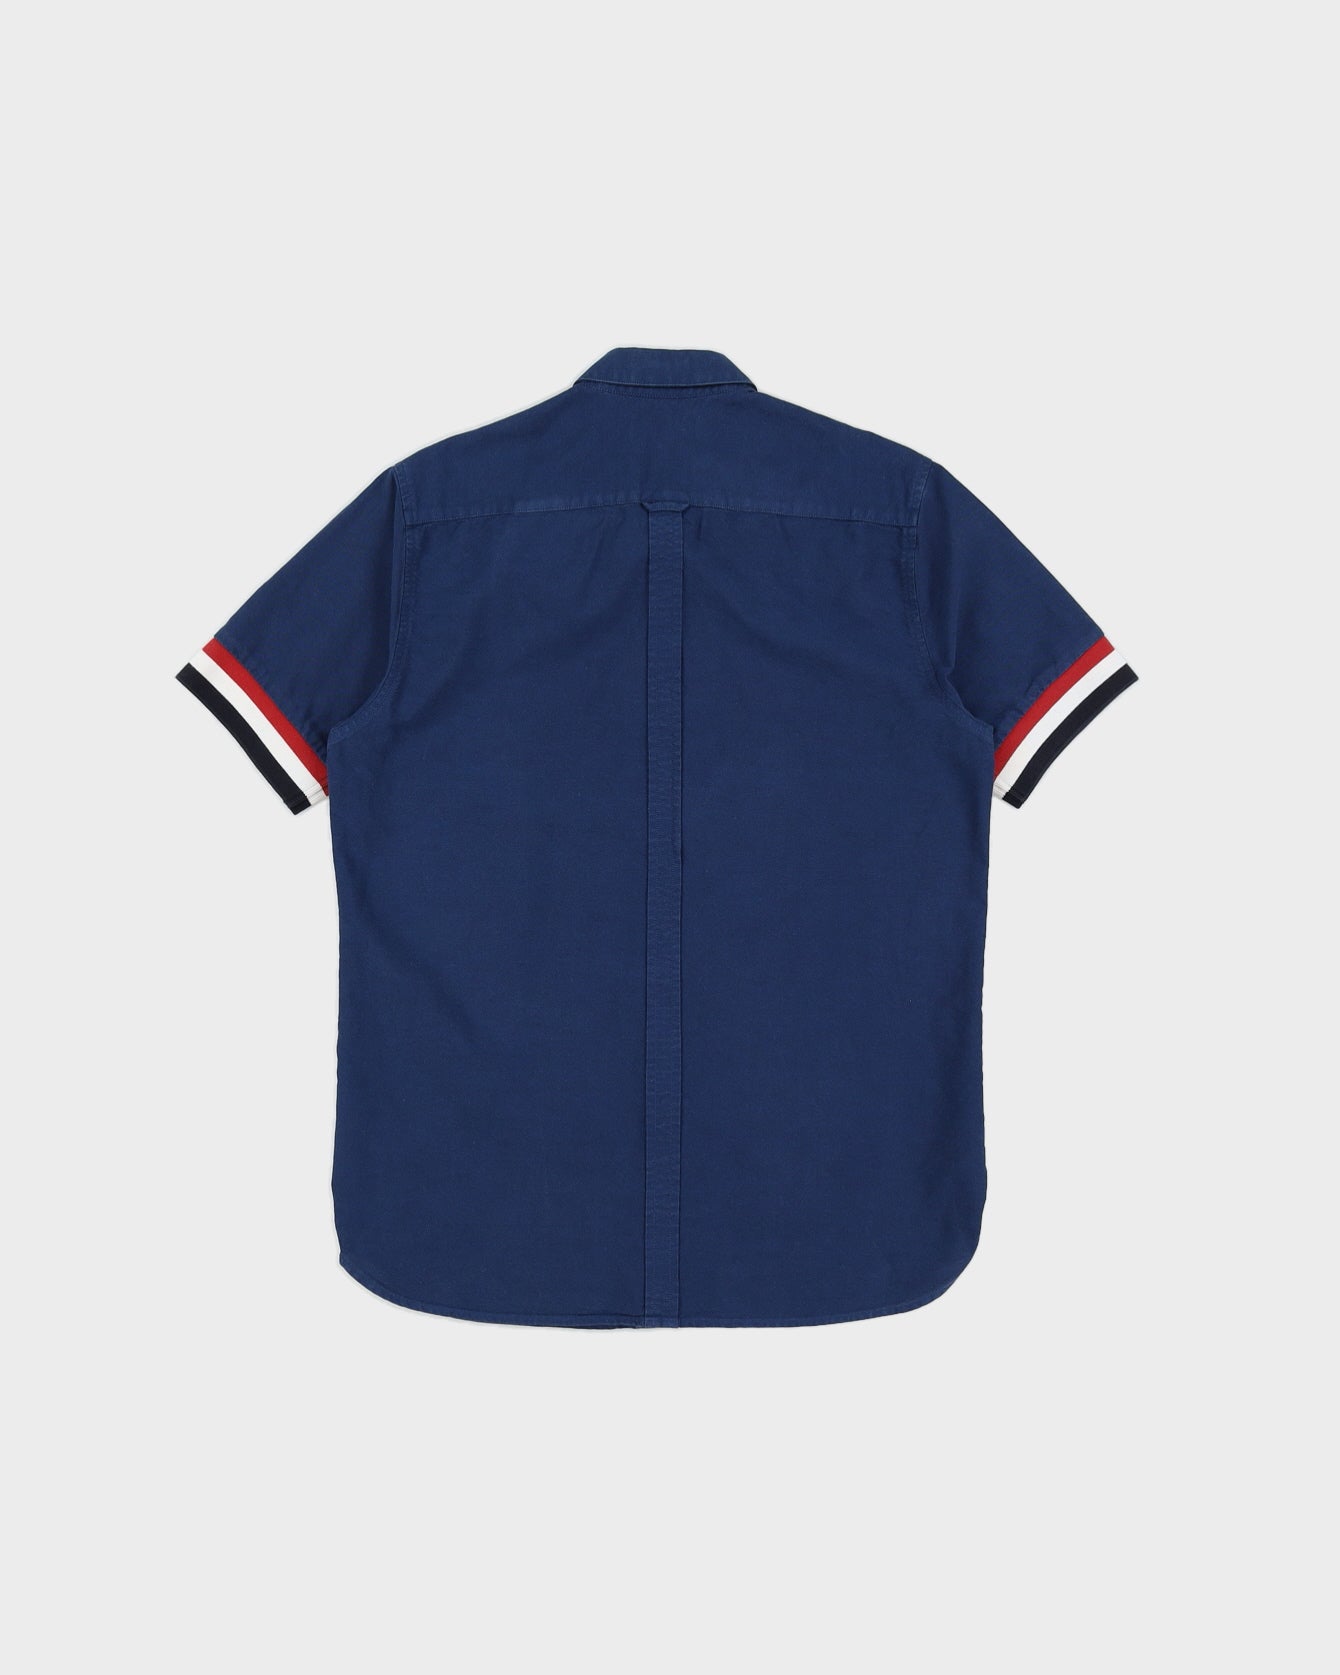 Fred Perry Blue Navy  Short Sleeved Shirt - M